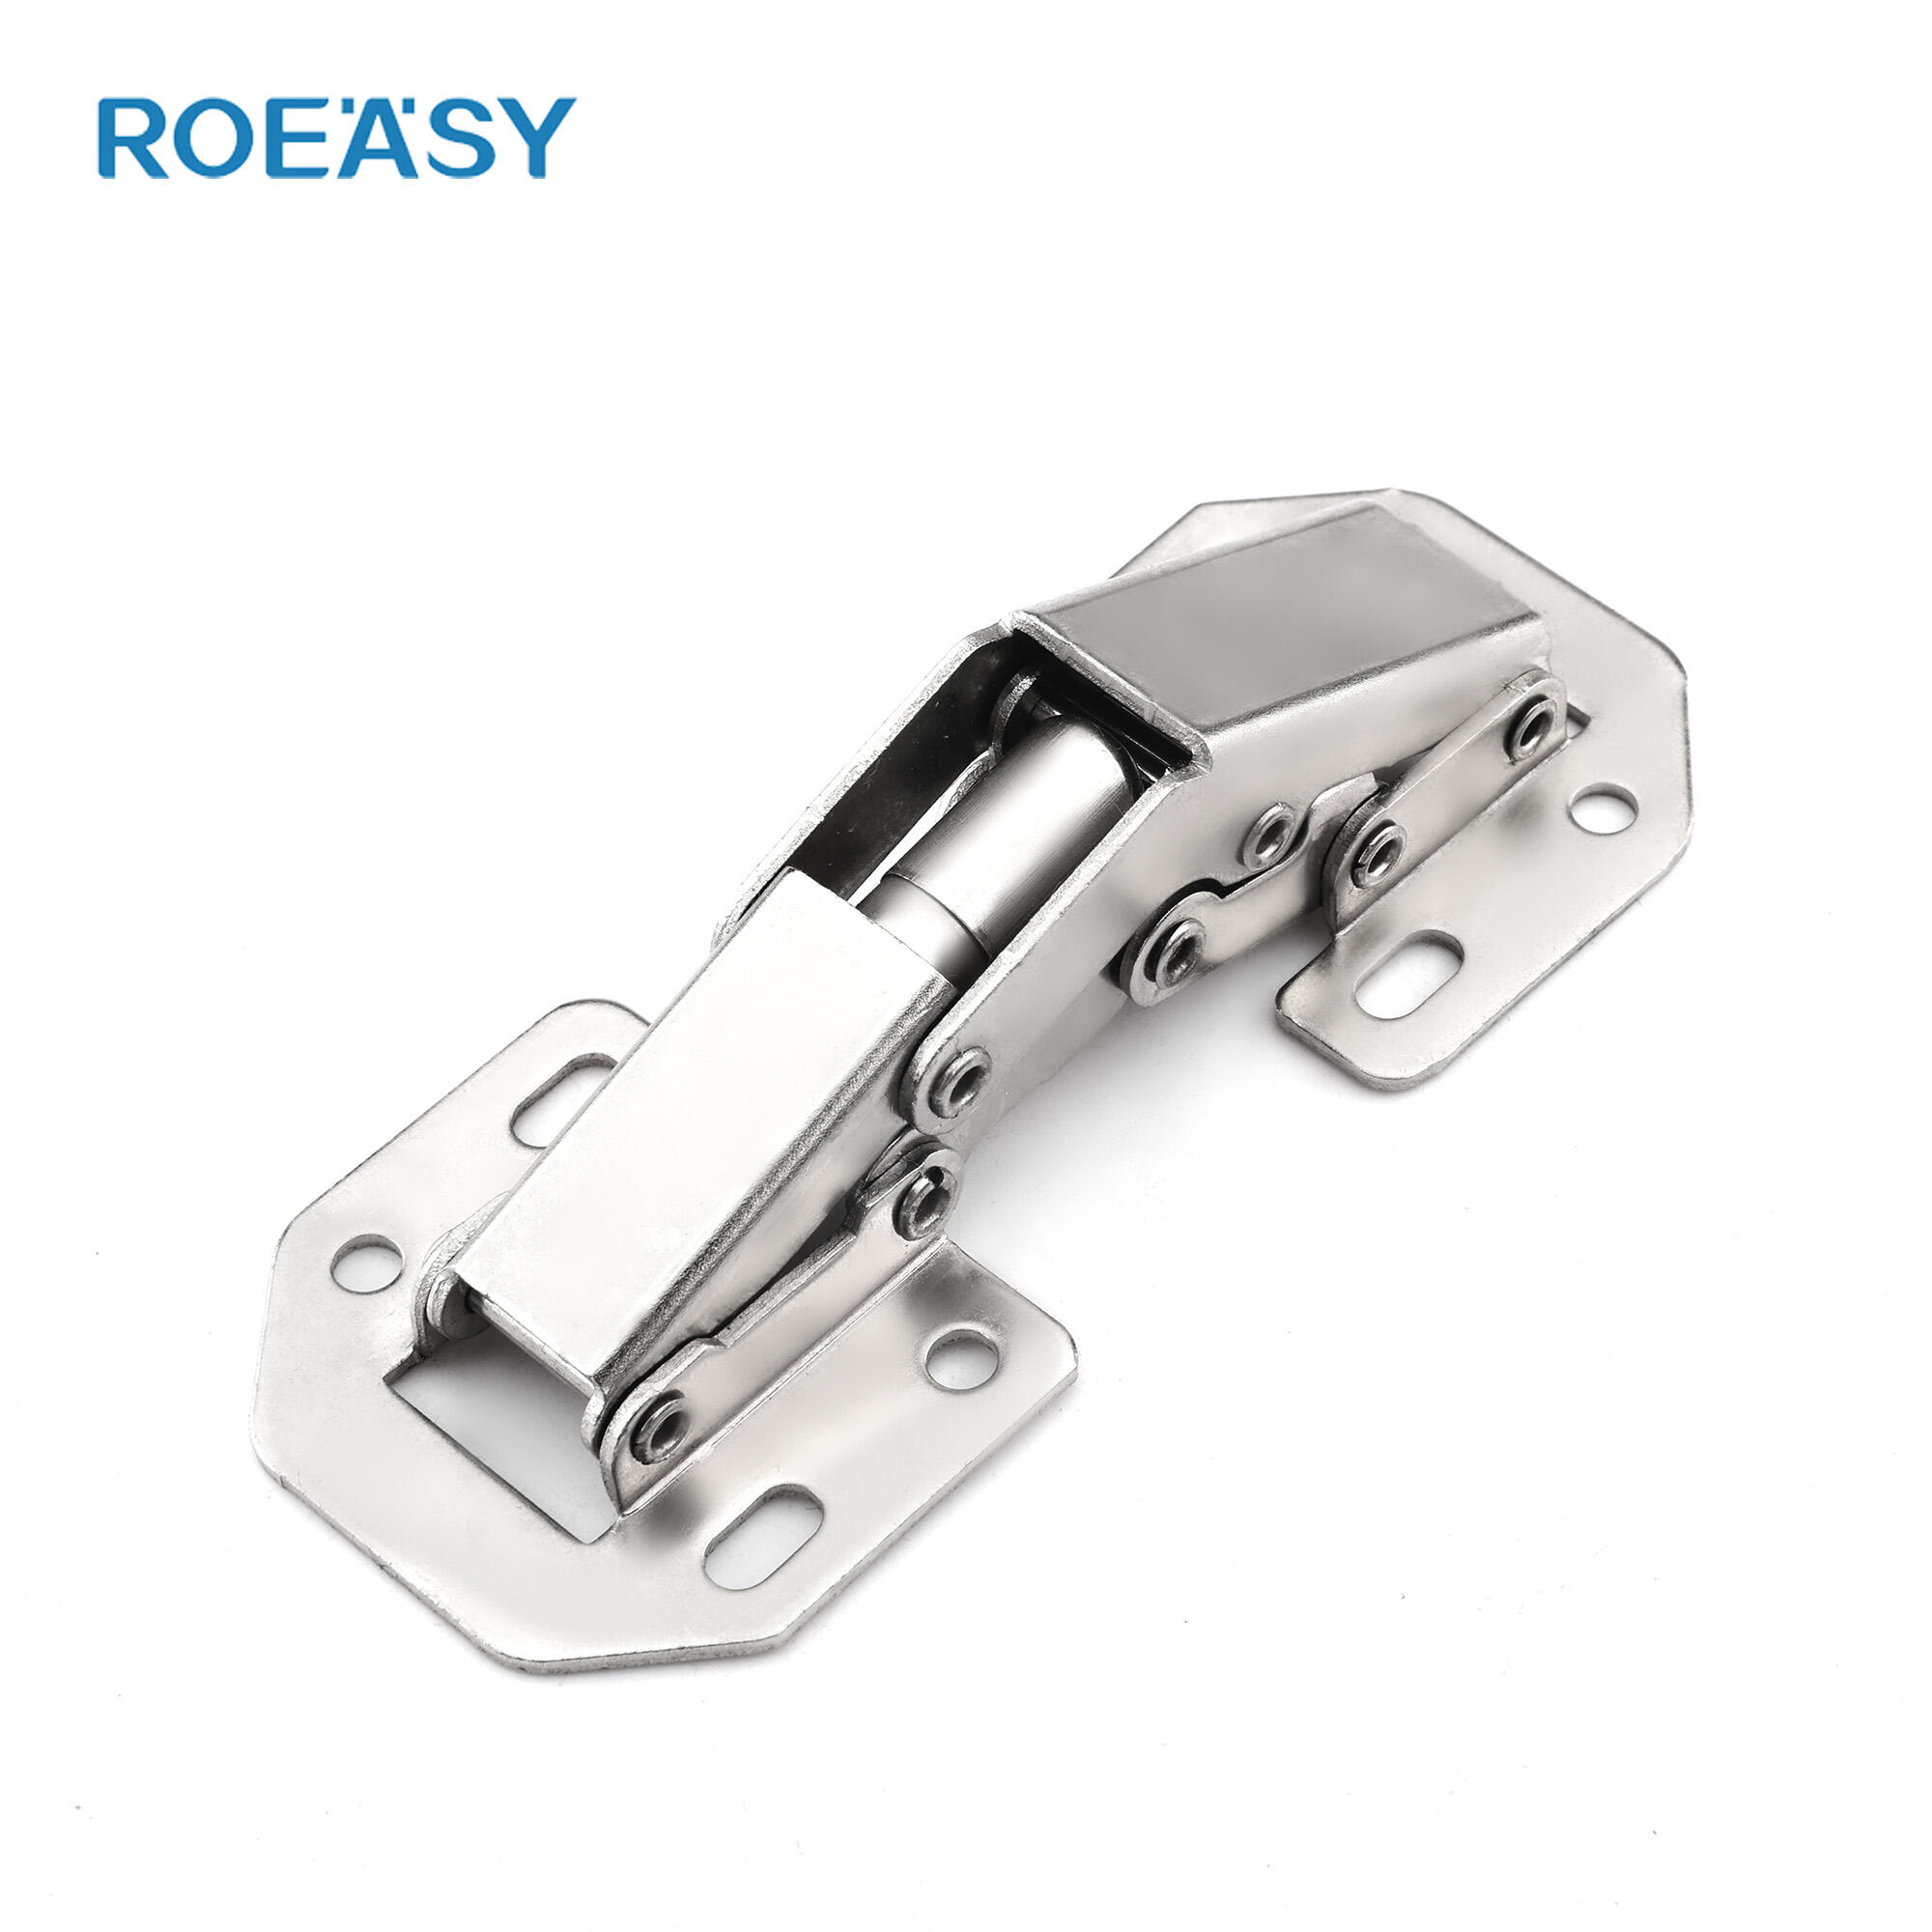 Roeasy FH-002 Screw-in Type 4 inch 90 degree frog shaped spring cabinet hinge